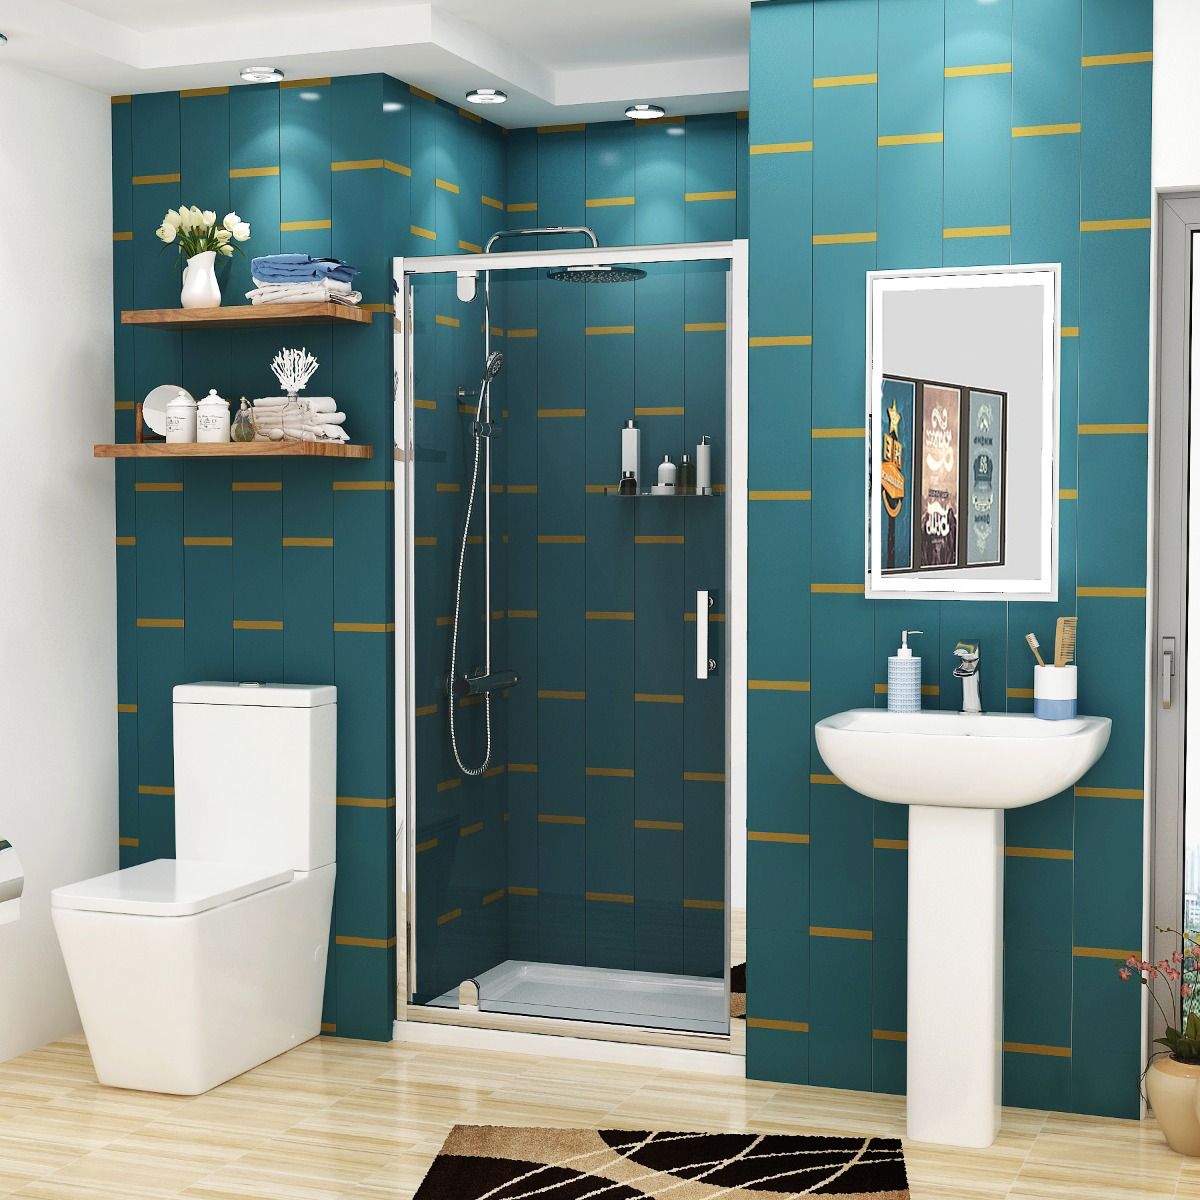 A Guide on Designing Different Types Of Bathrooms